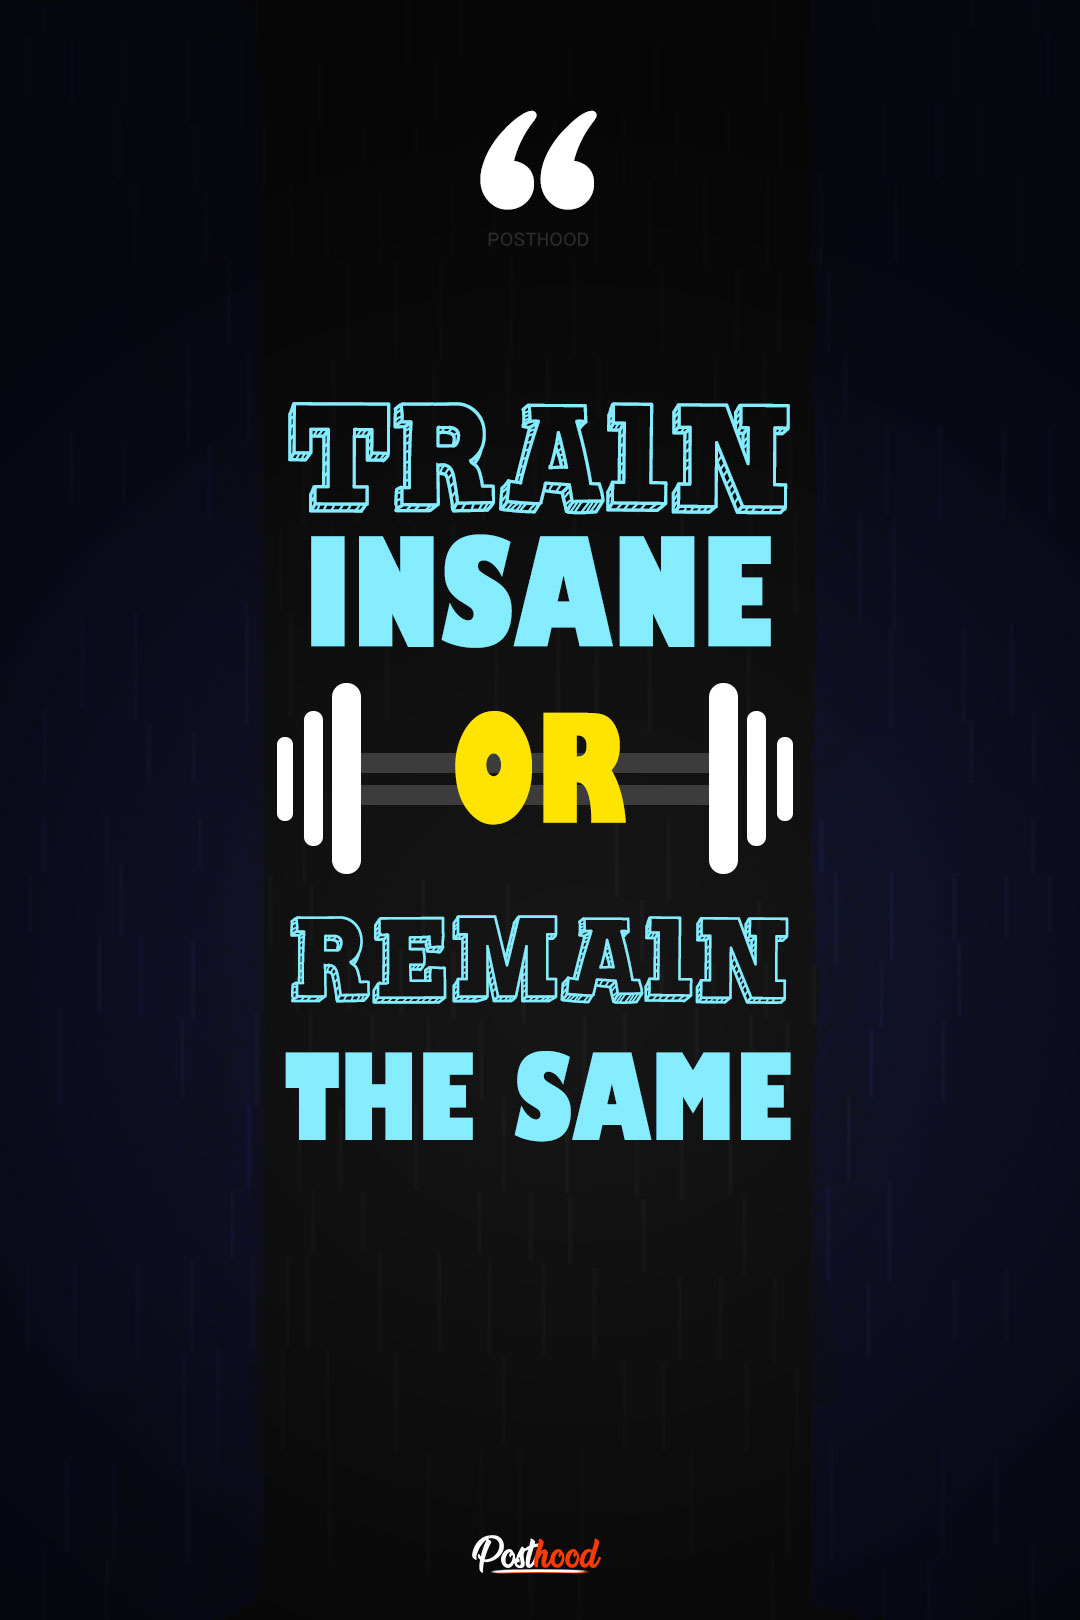 Inspirational fitness quotes wallpaper, Fitness quotes for gym. Free motivational quotes and phone wallpaper.